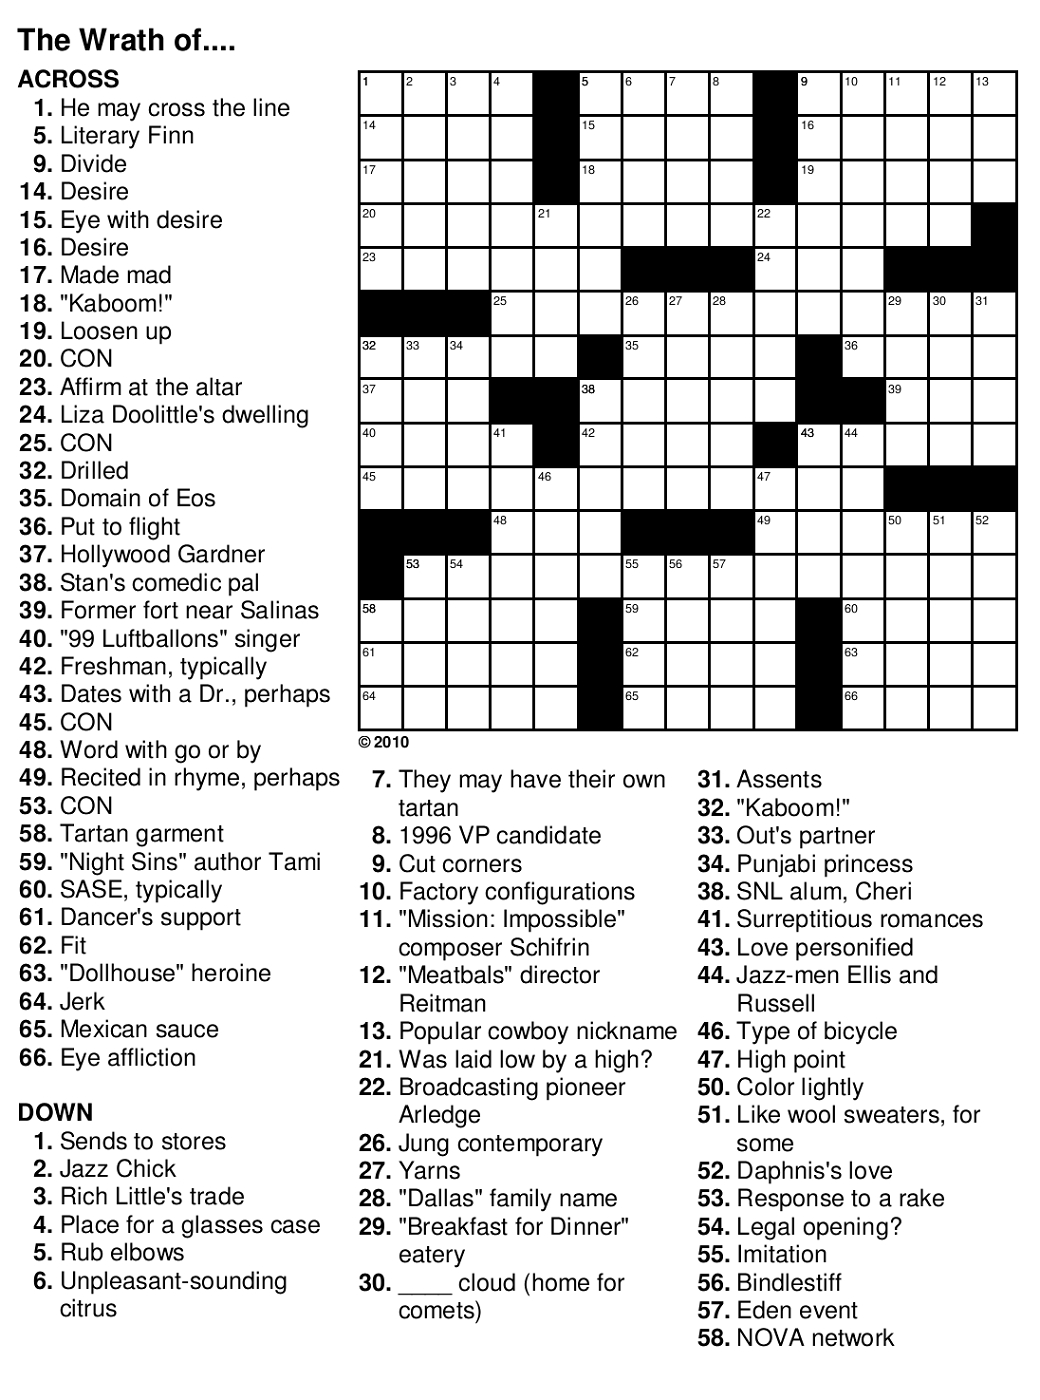 Easy Crossword Puzzles For Seniors | Activity Shelter - Printable Brain Puzzles For Senior Citizens